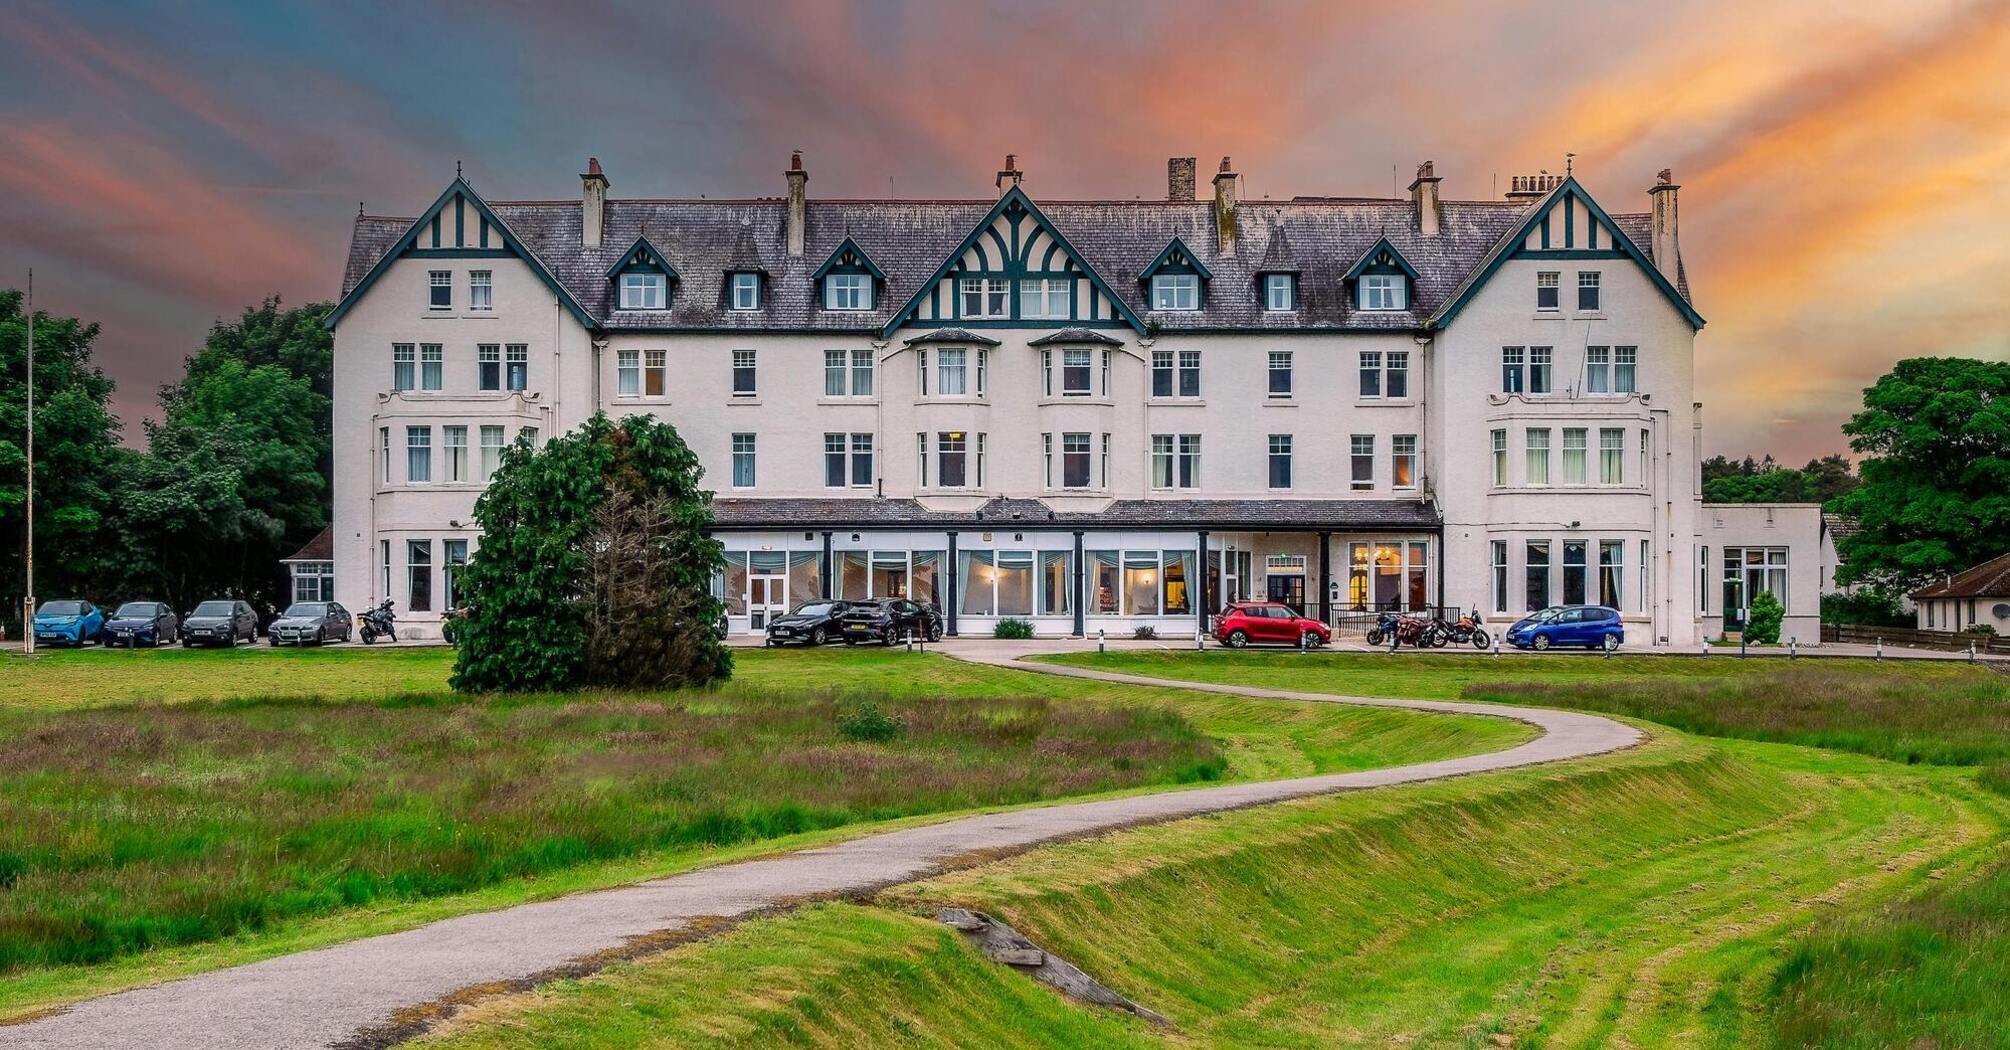 The best countryside hotels in the UK: 14 locations for a dream vacation with family or friends